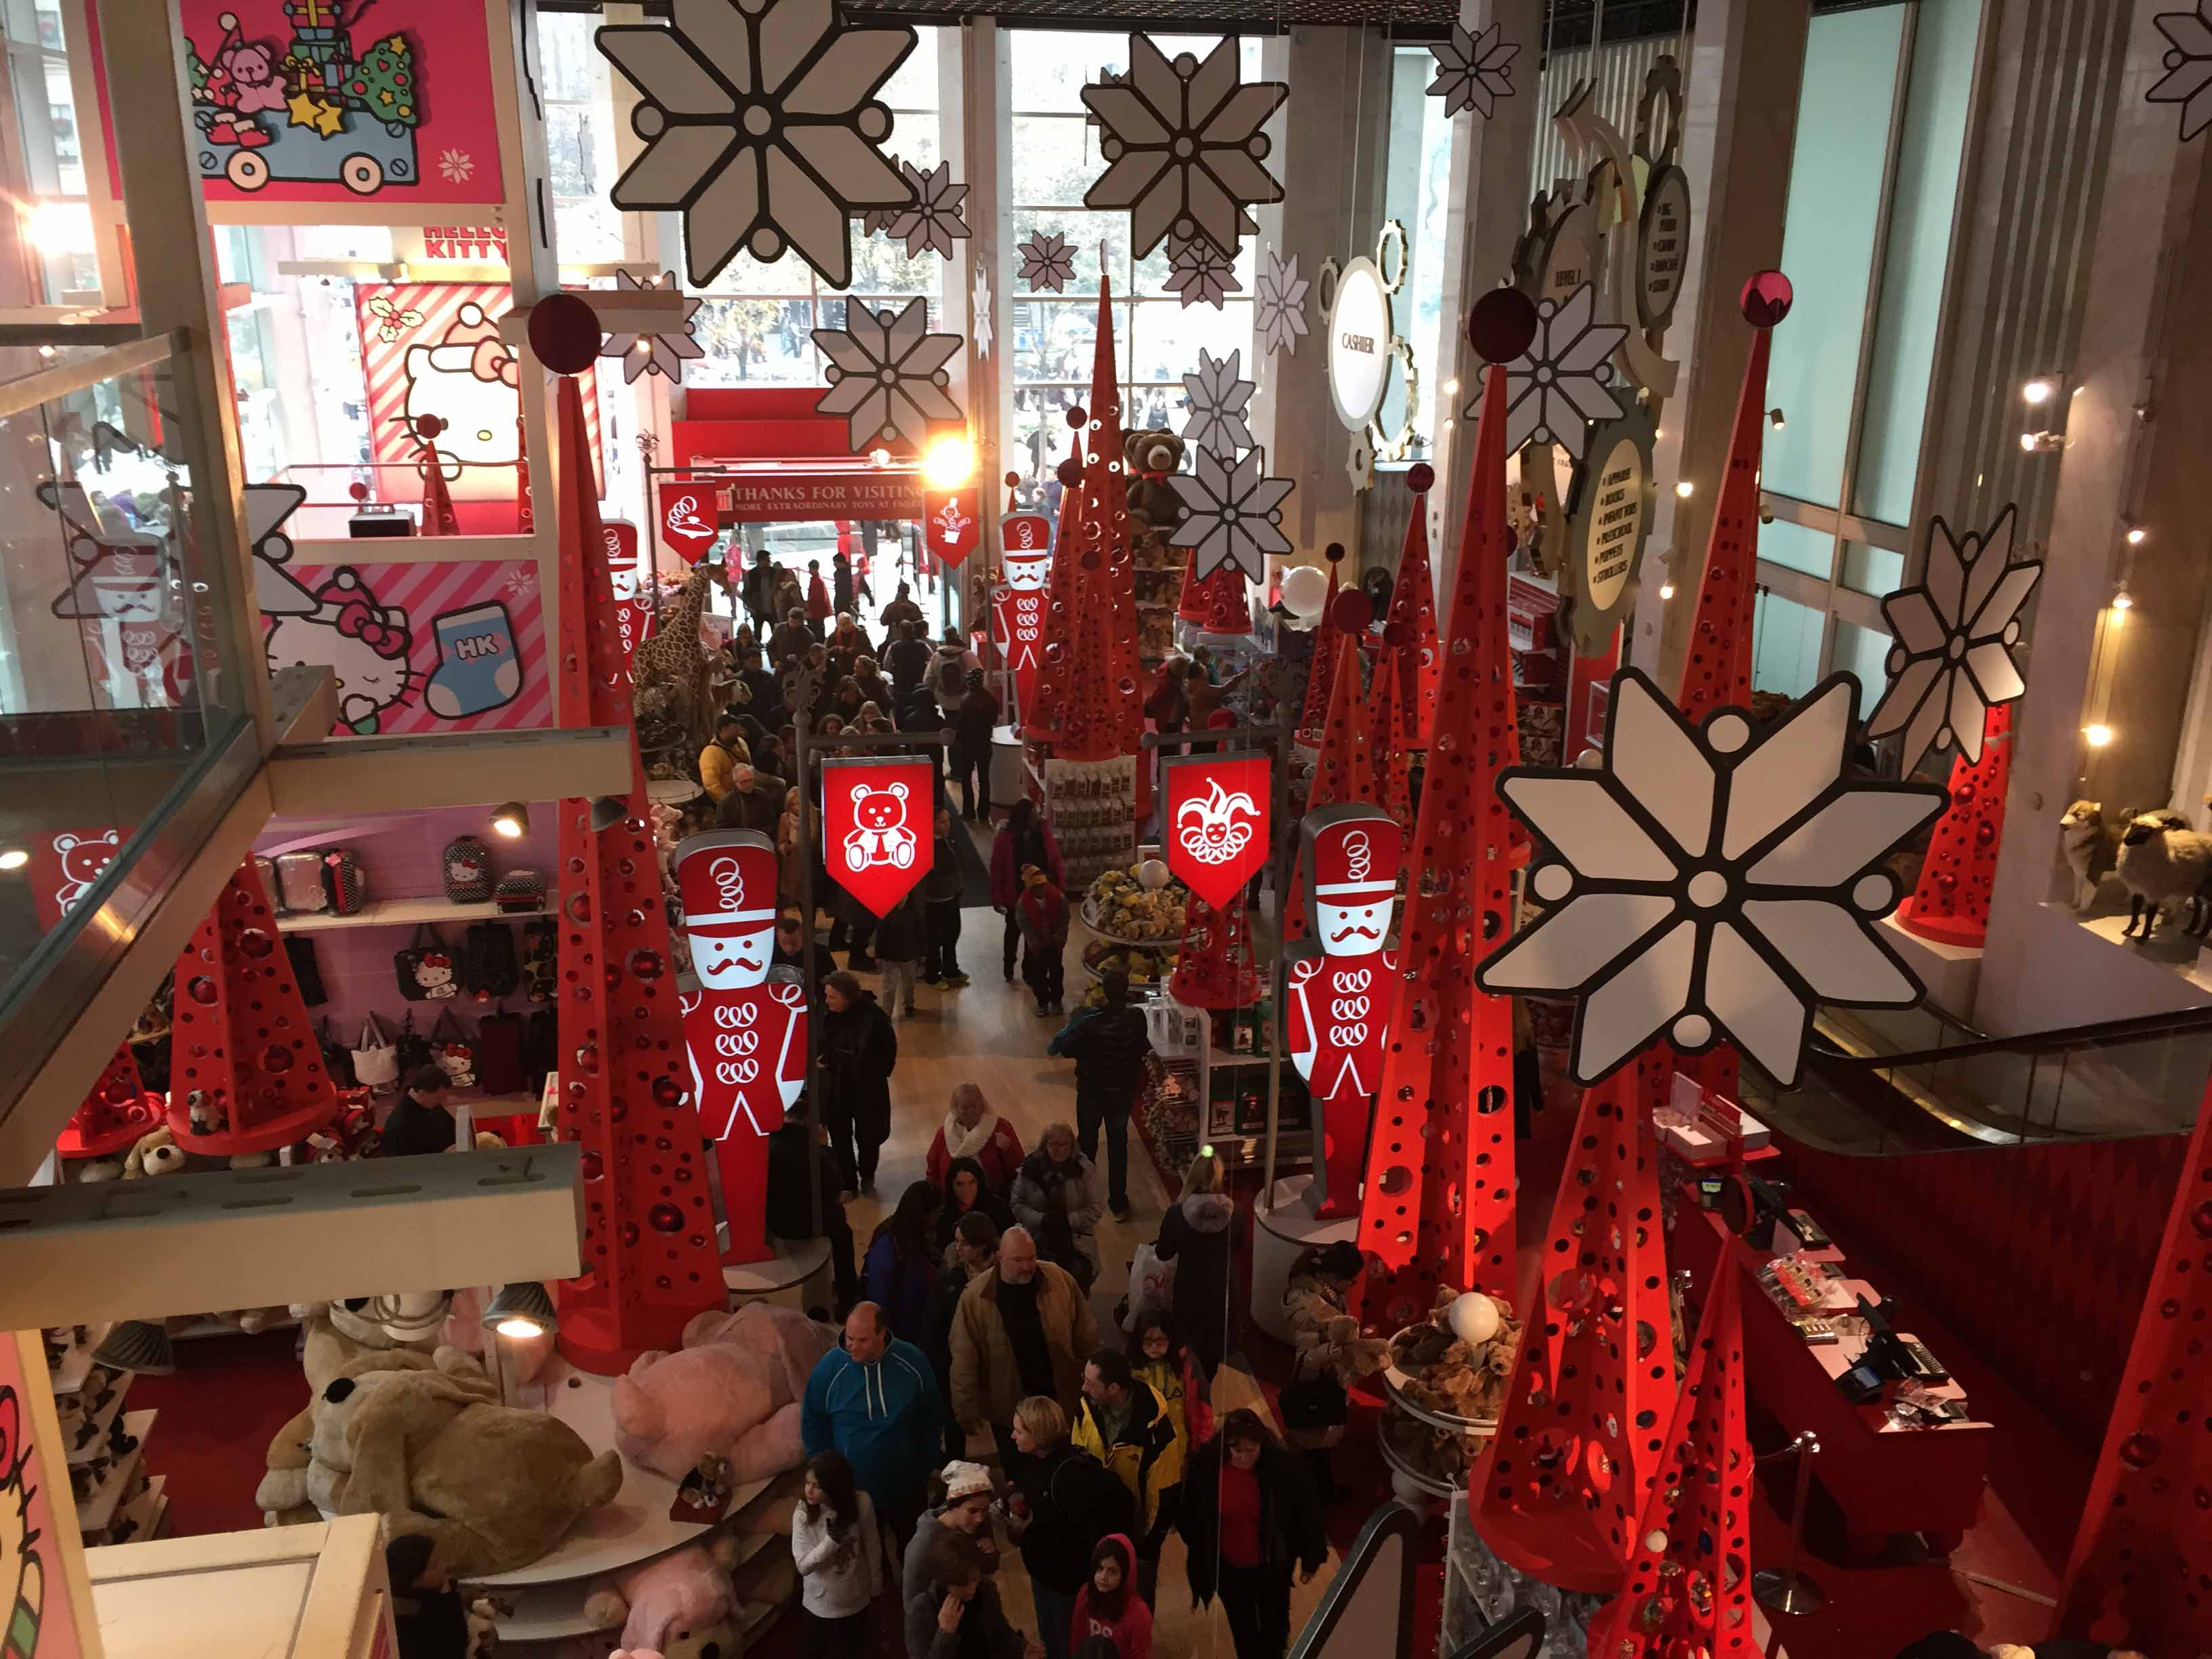 Last day of business at NYC's FAO Schwarz toy store